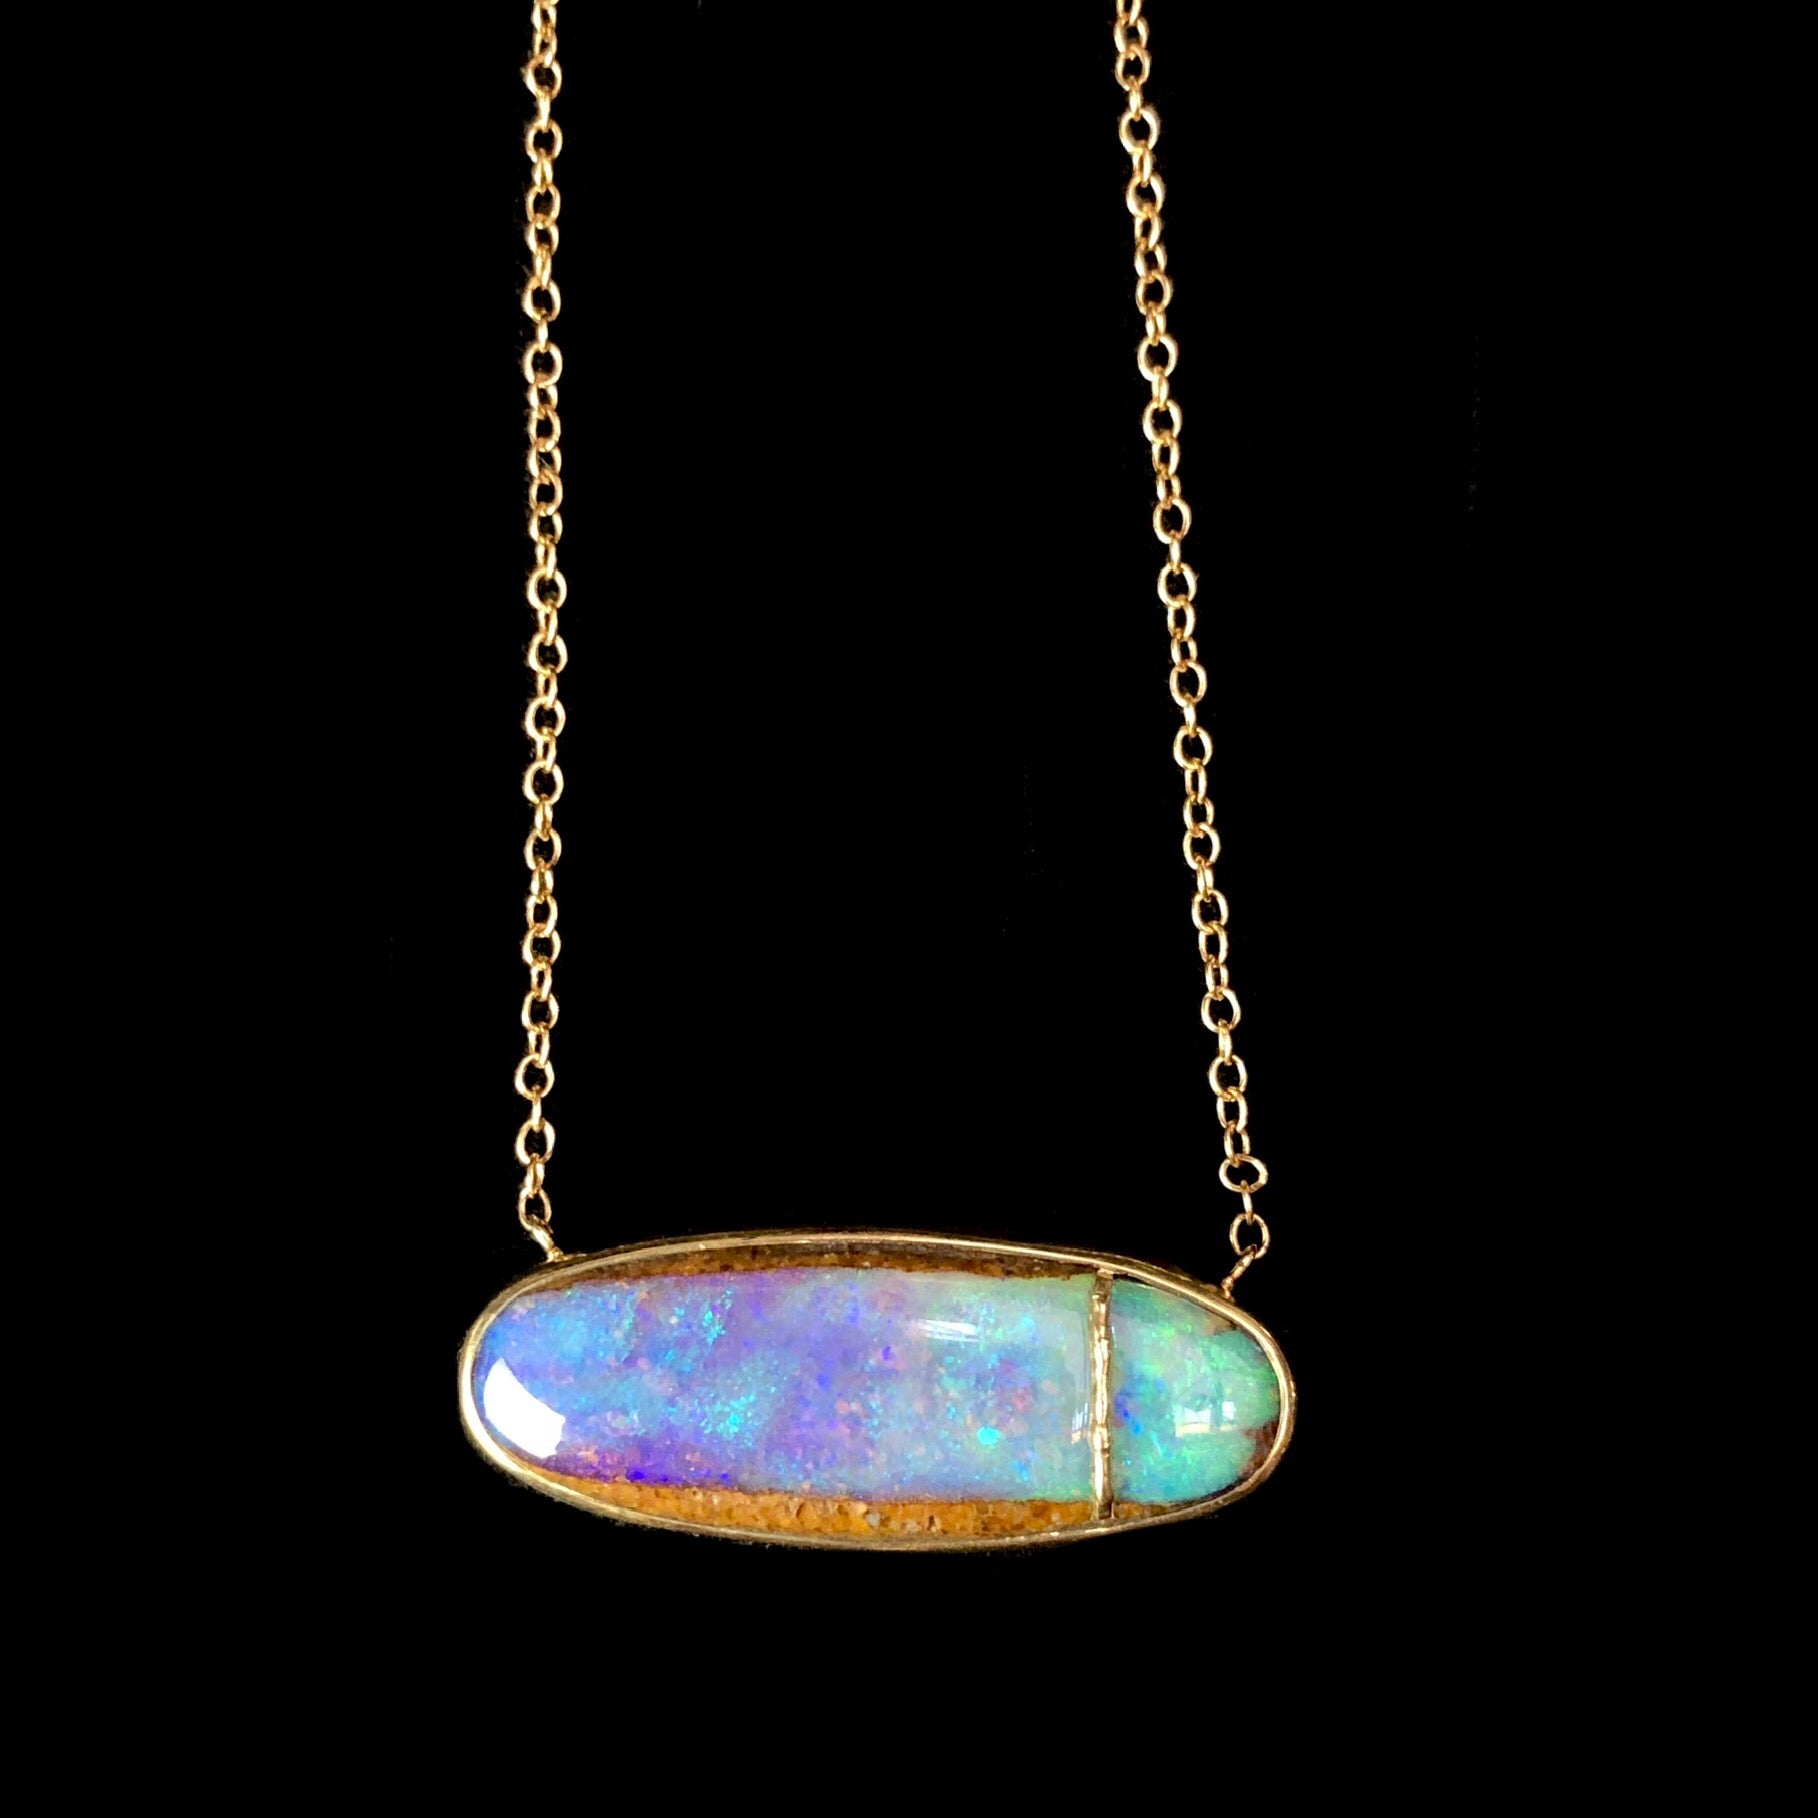 Close up of Opalized Wood Necklace pendant